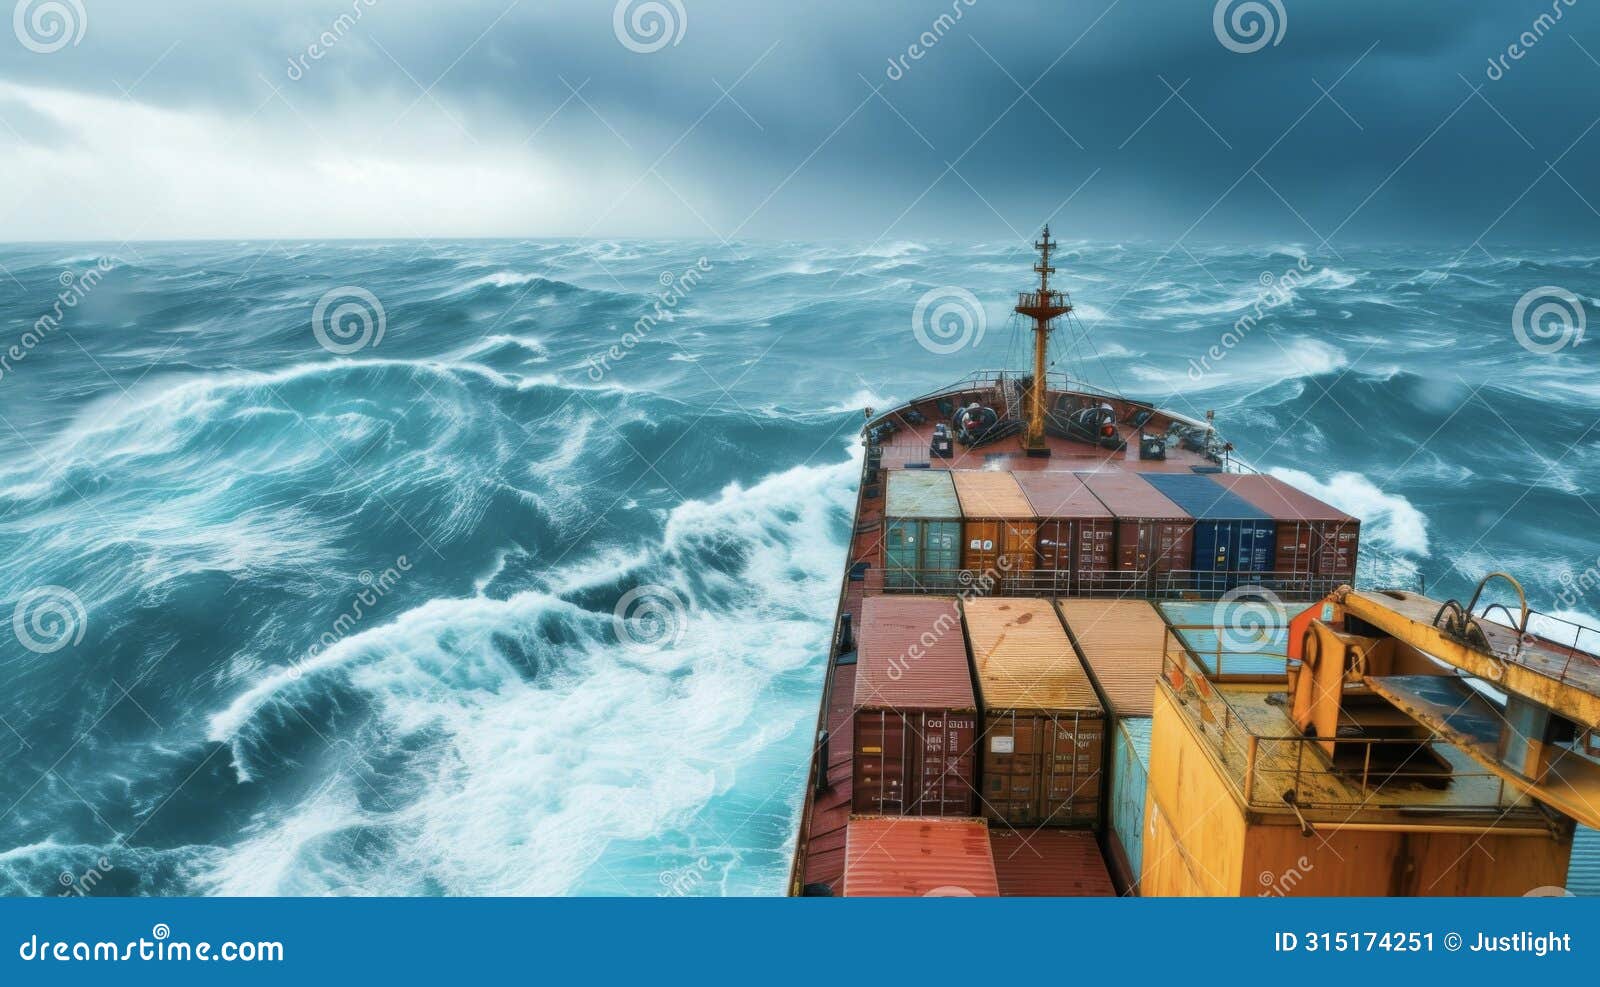 a container ship navigating through rough seas with crew members taking necessary safety precautions in accordance with